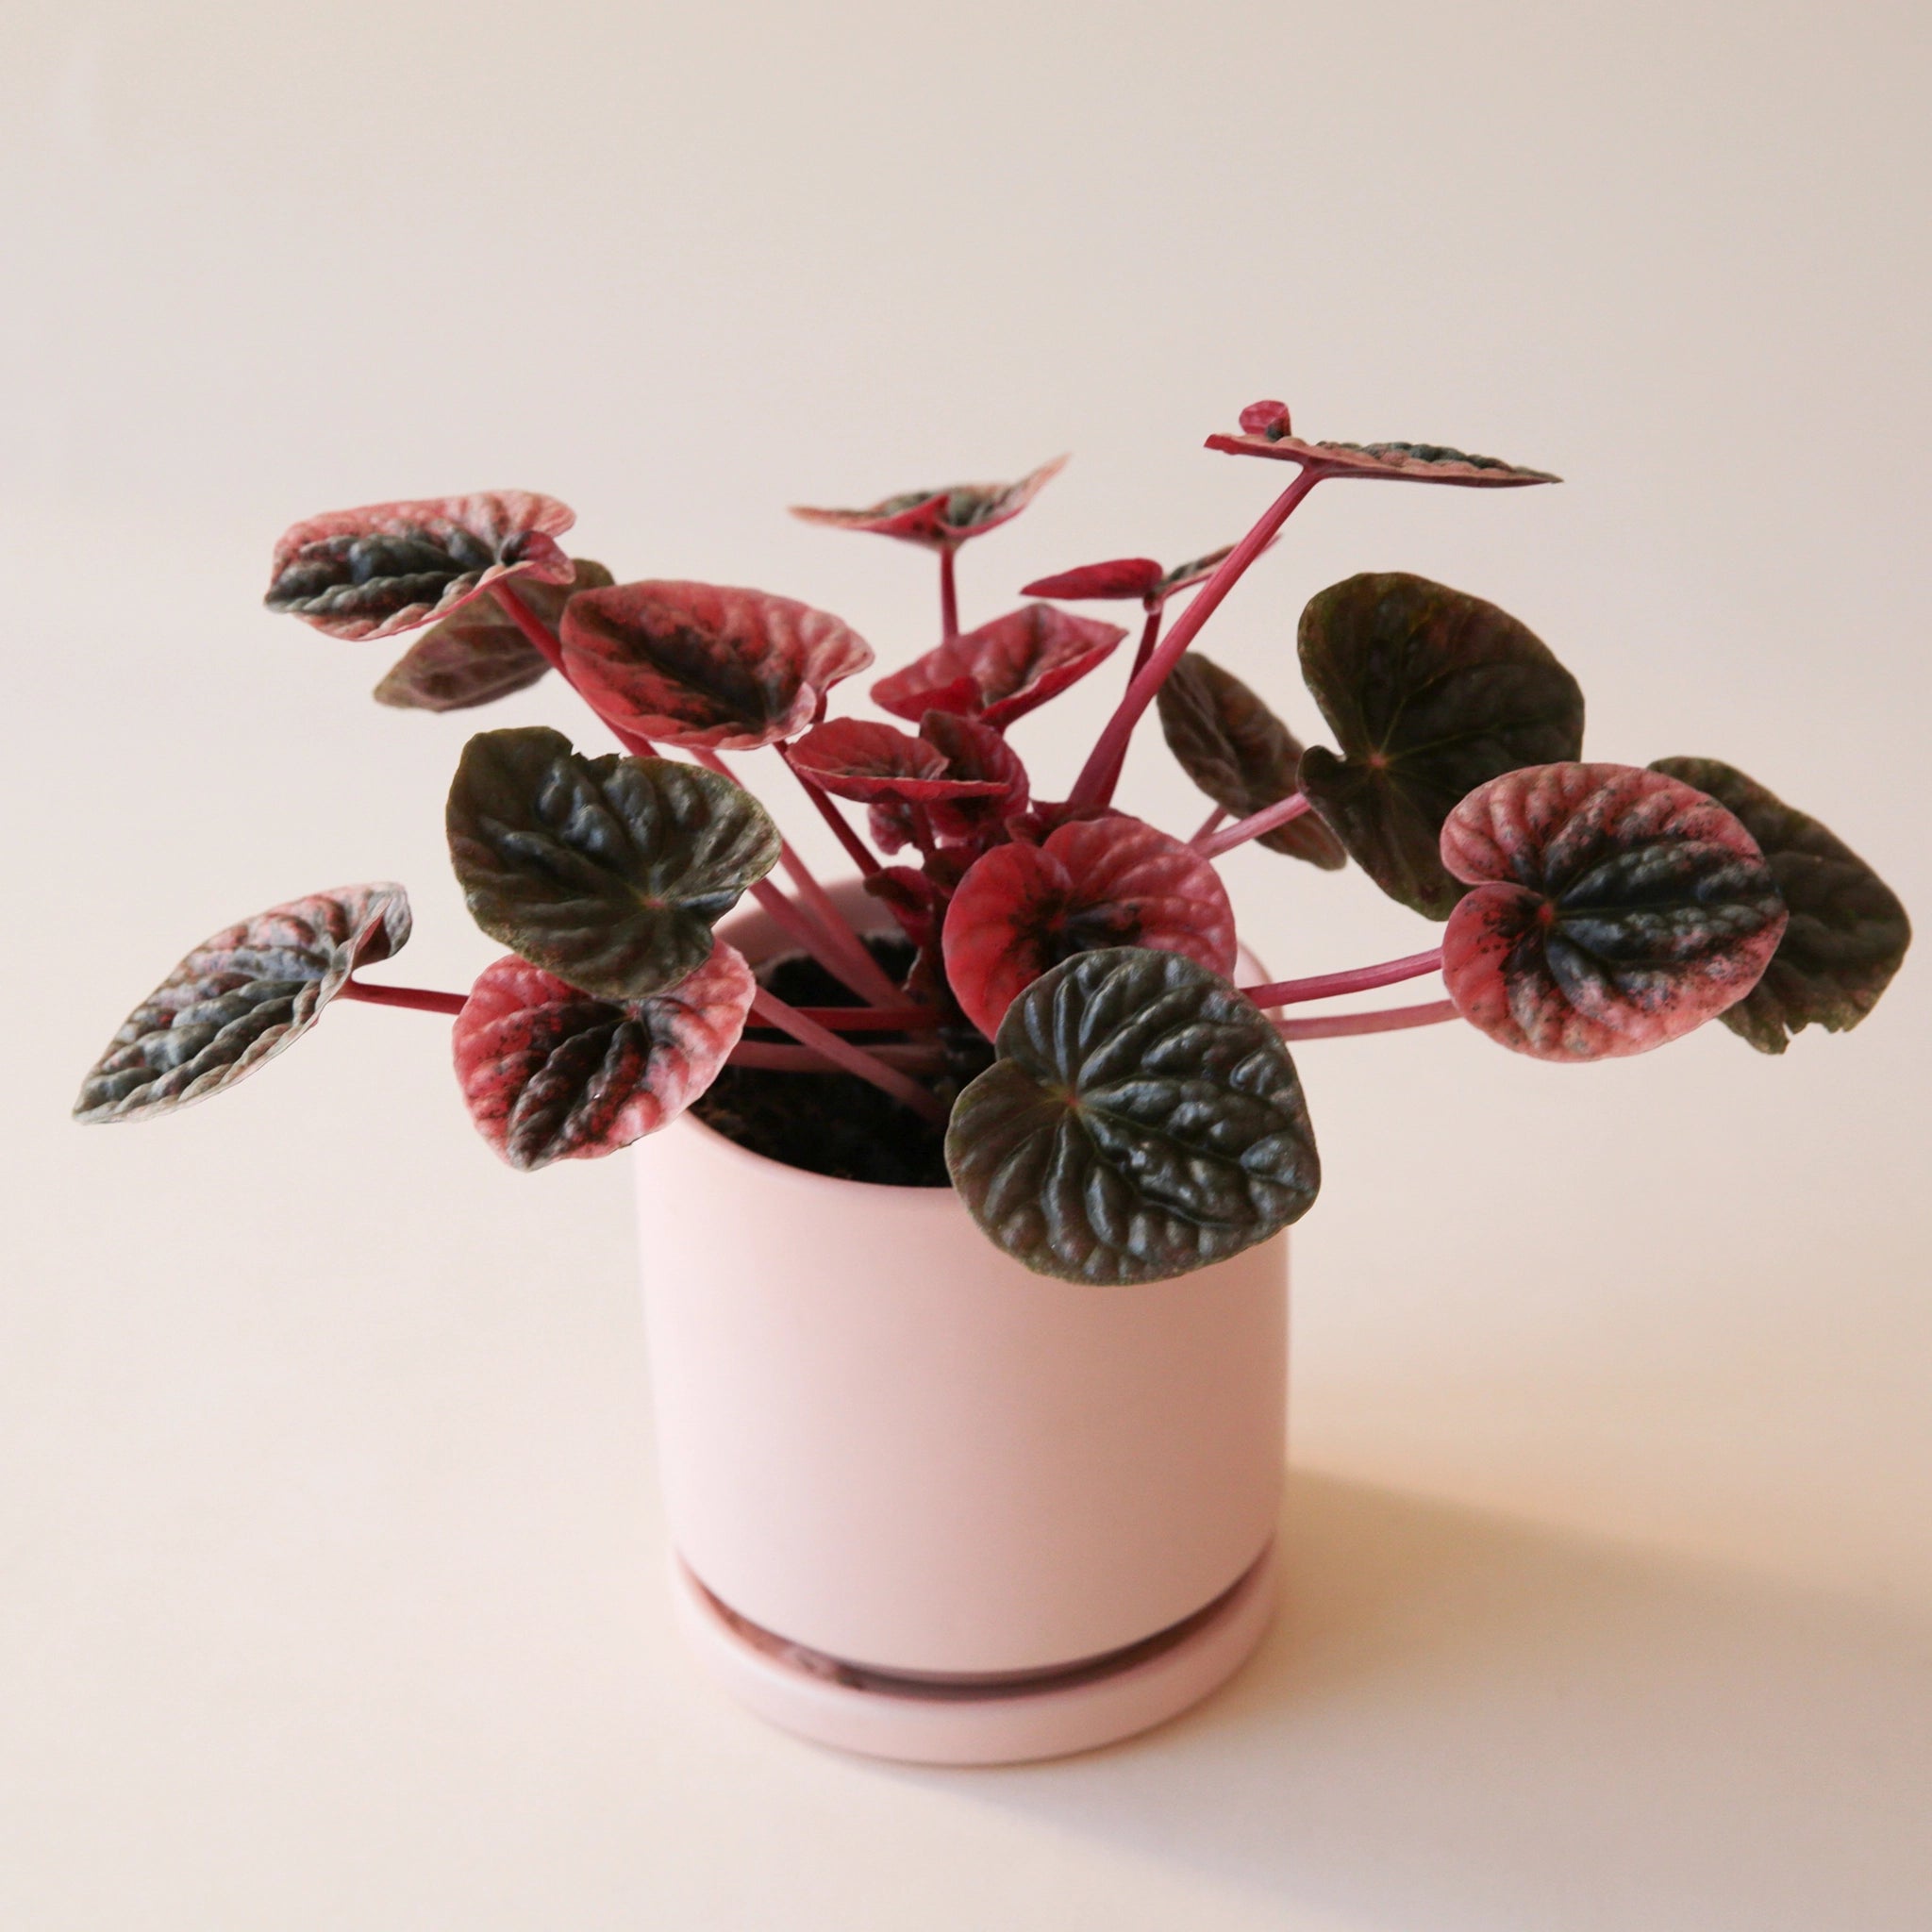 On a neutral background is a Peperomia Ambricos planted in a light pink ceramic planter not indulged with purchase.